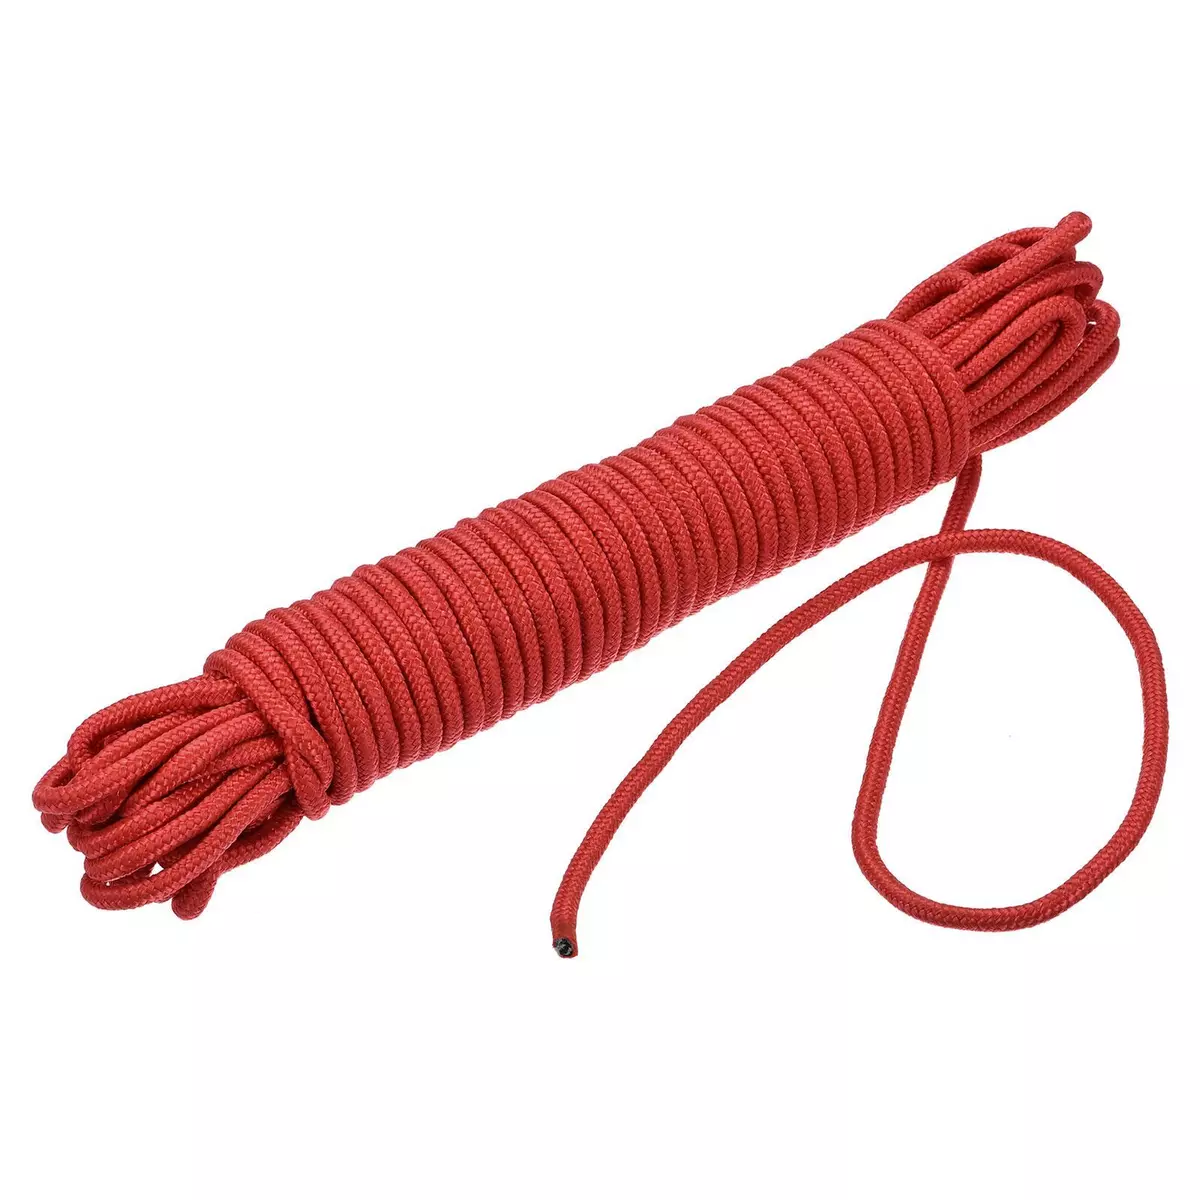 Nylon Rope Solid Braided 1 Roll of 0.23 Inch x 49.2 Foot Red